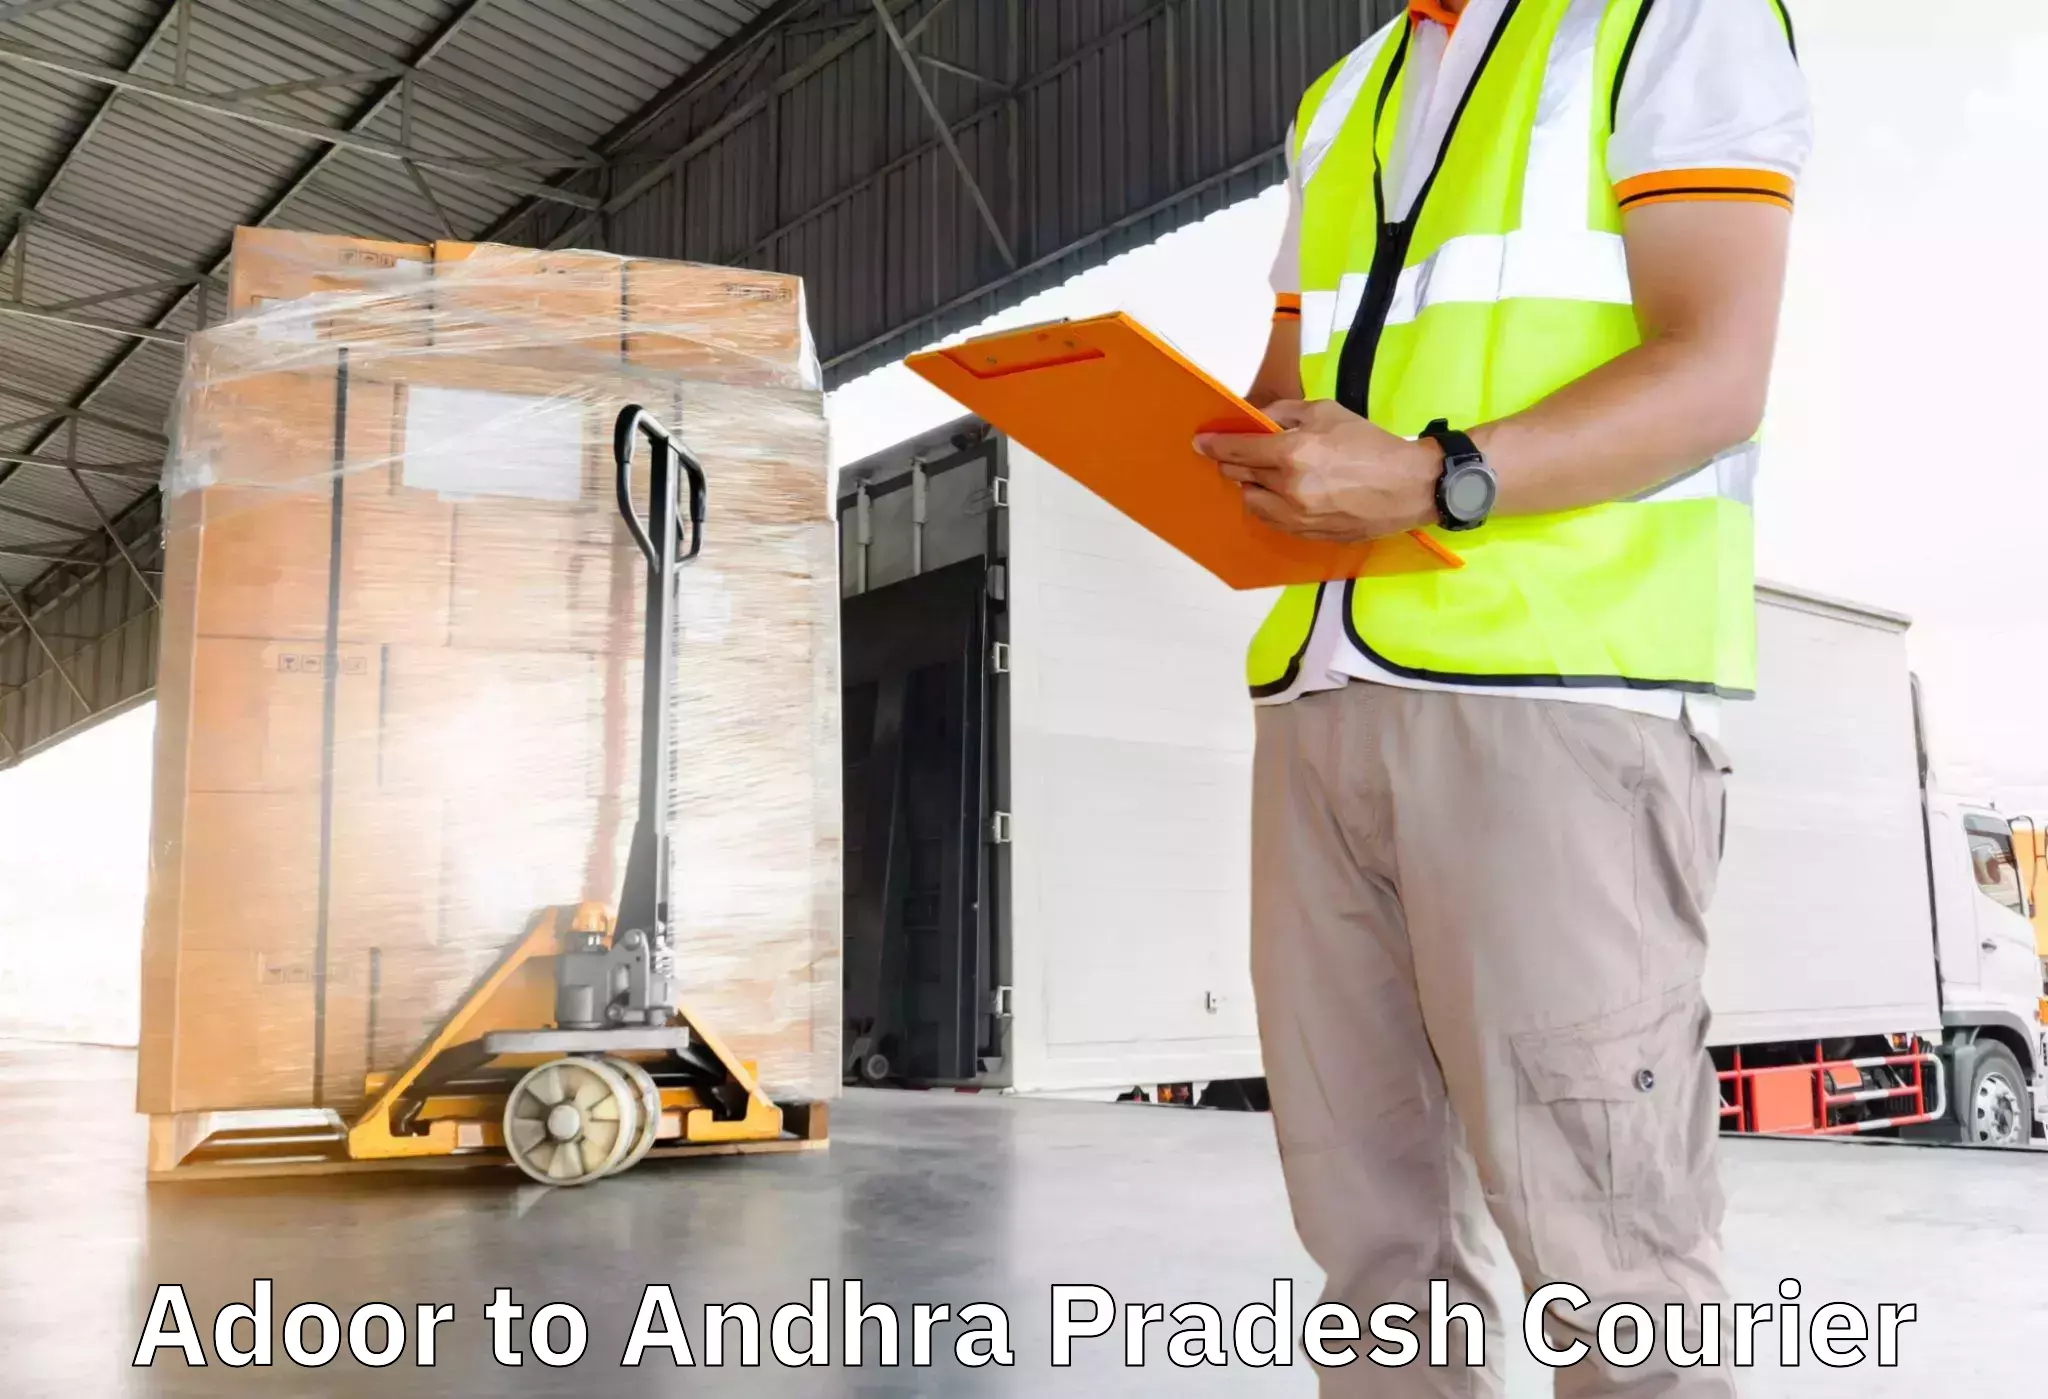 Quality relocation services Adoor to Gullapalli